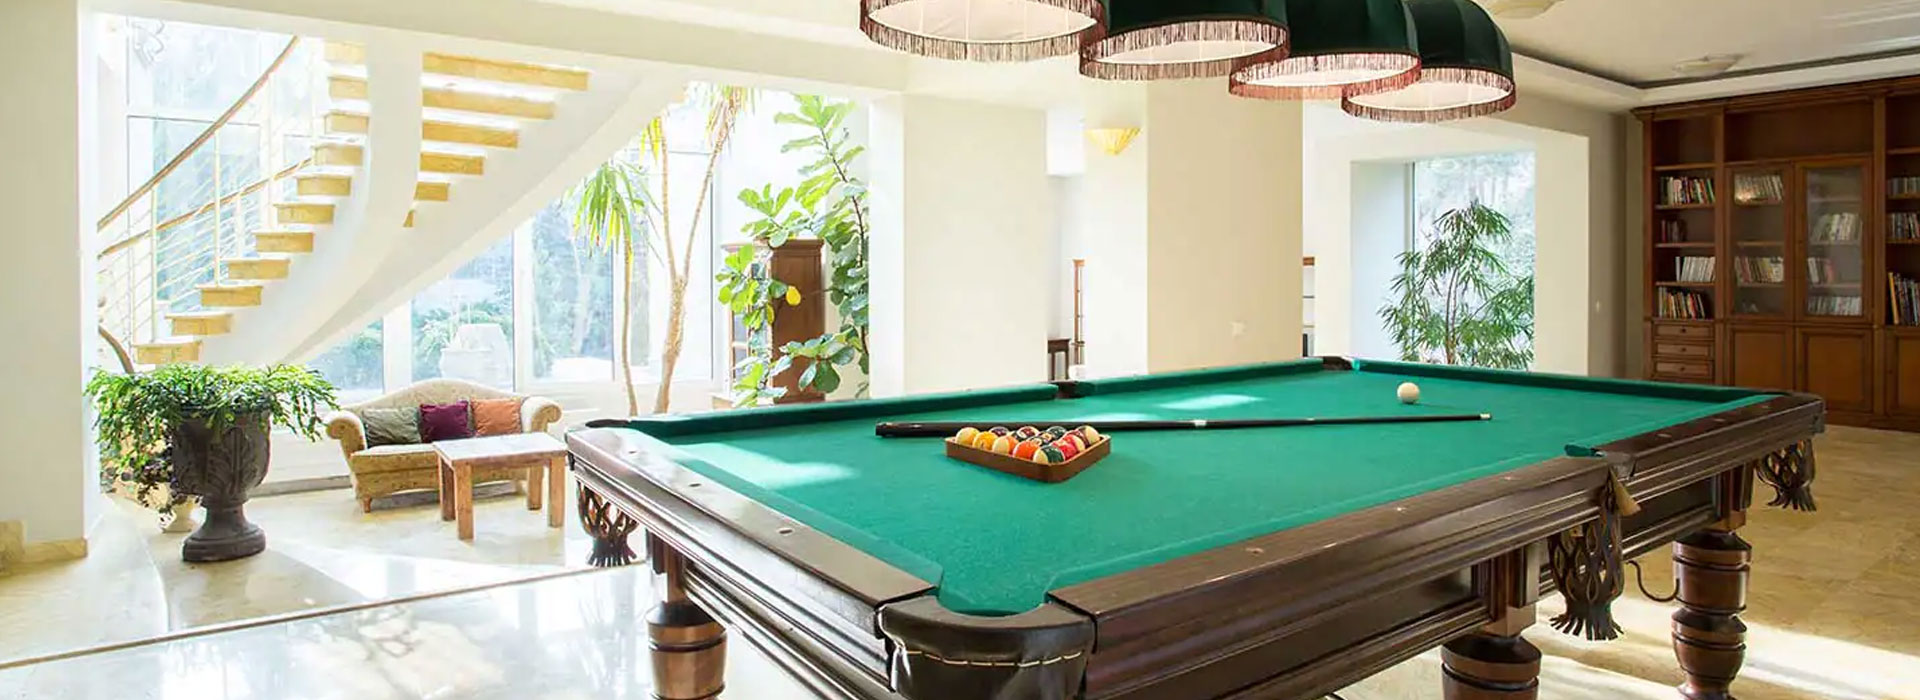 pool-table-removal-service